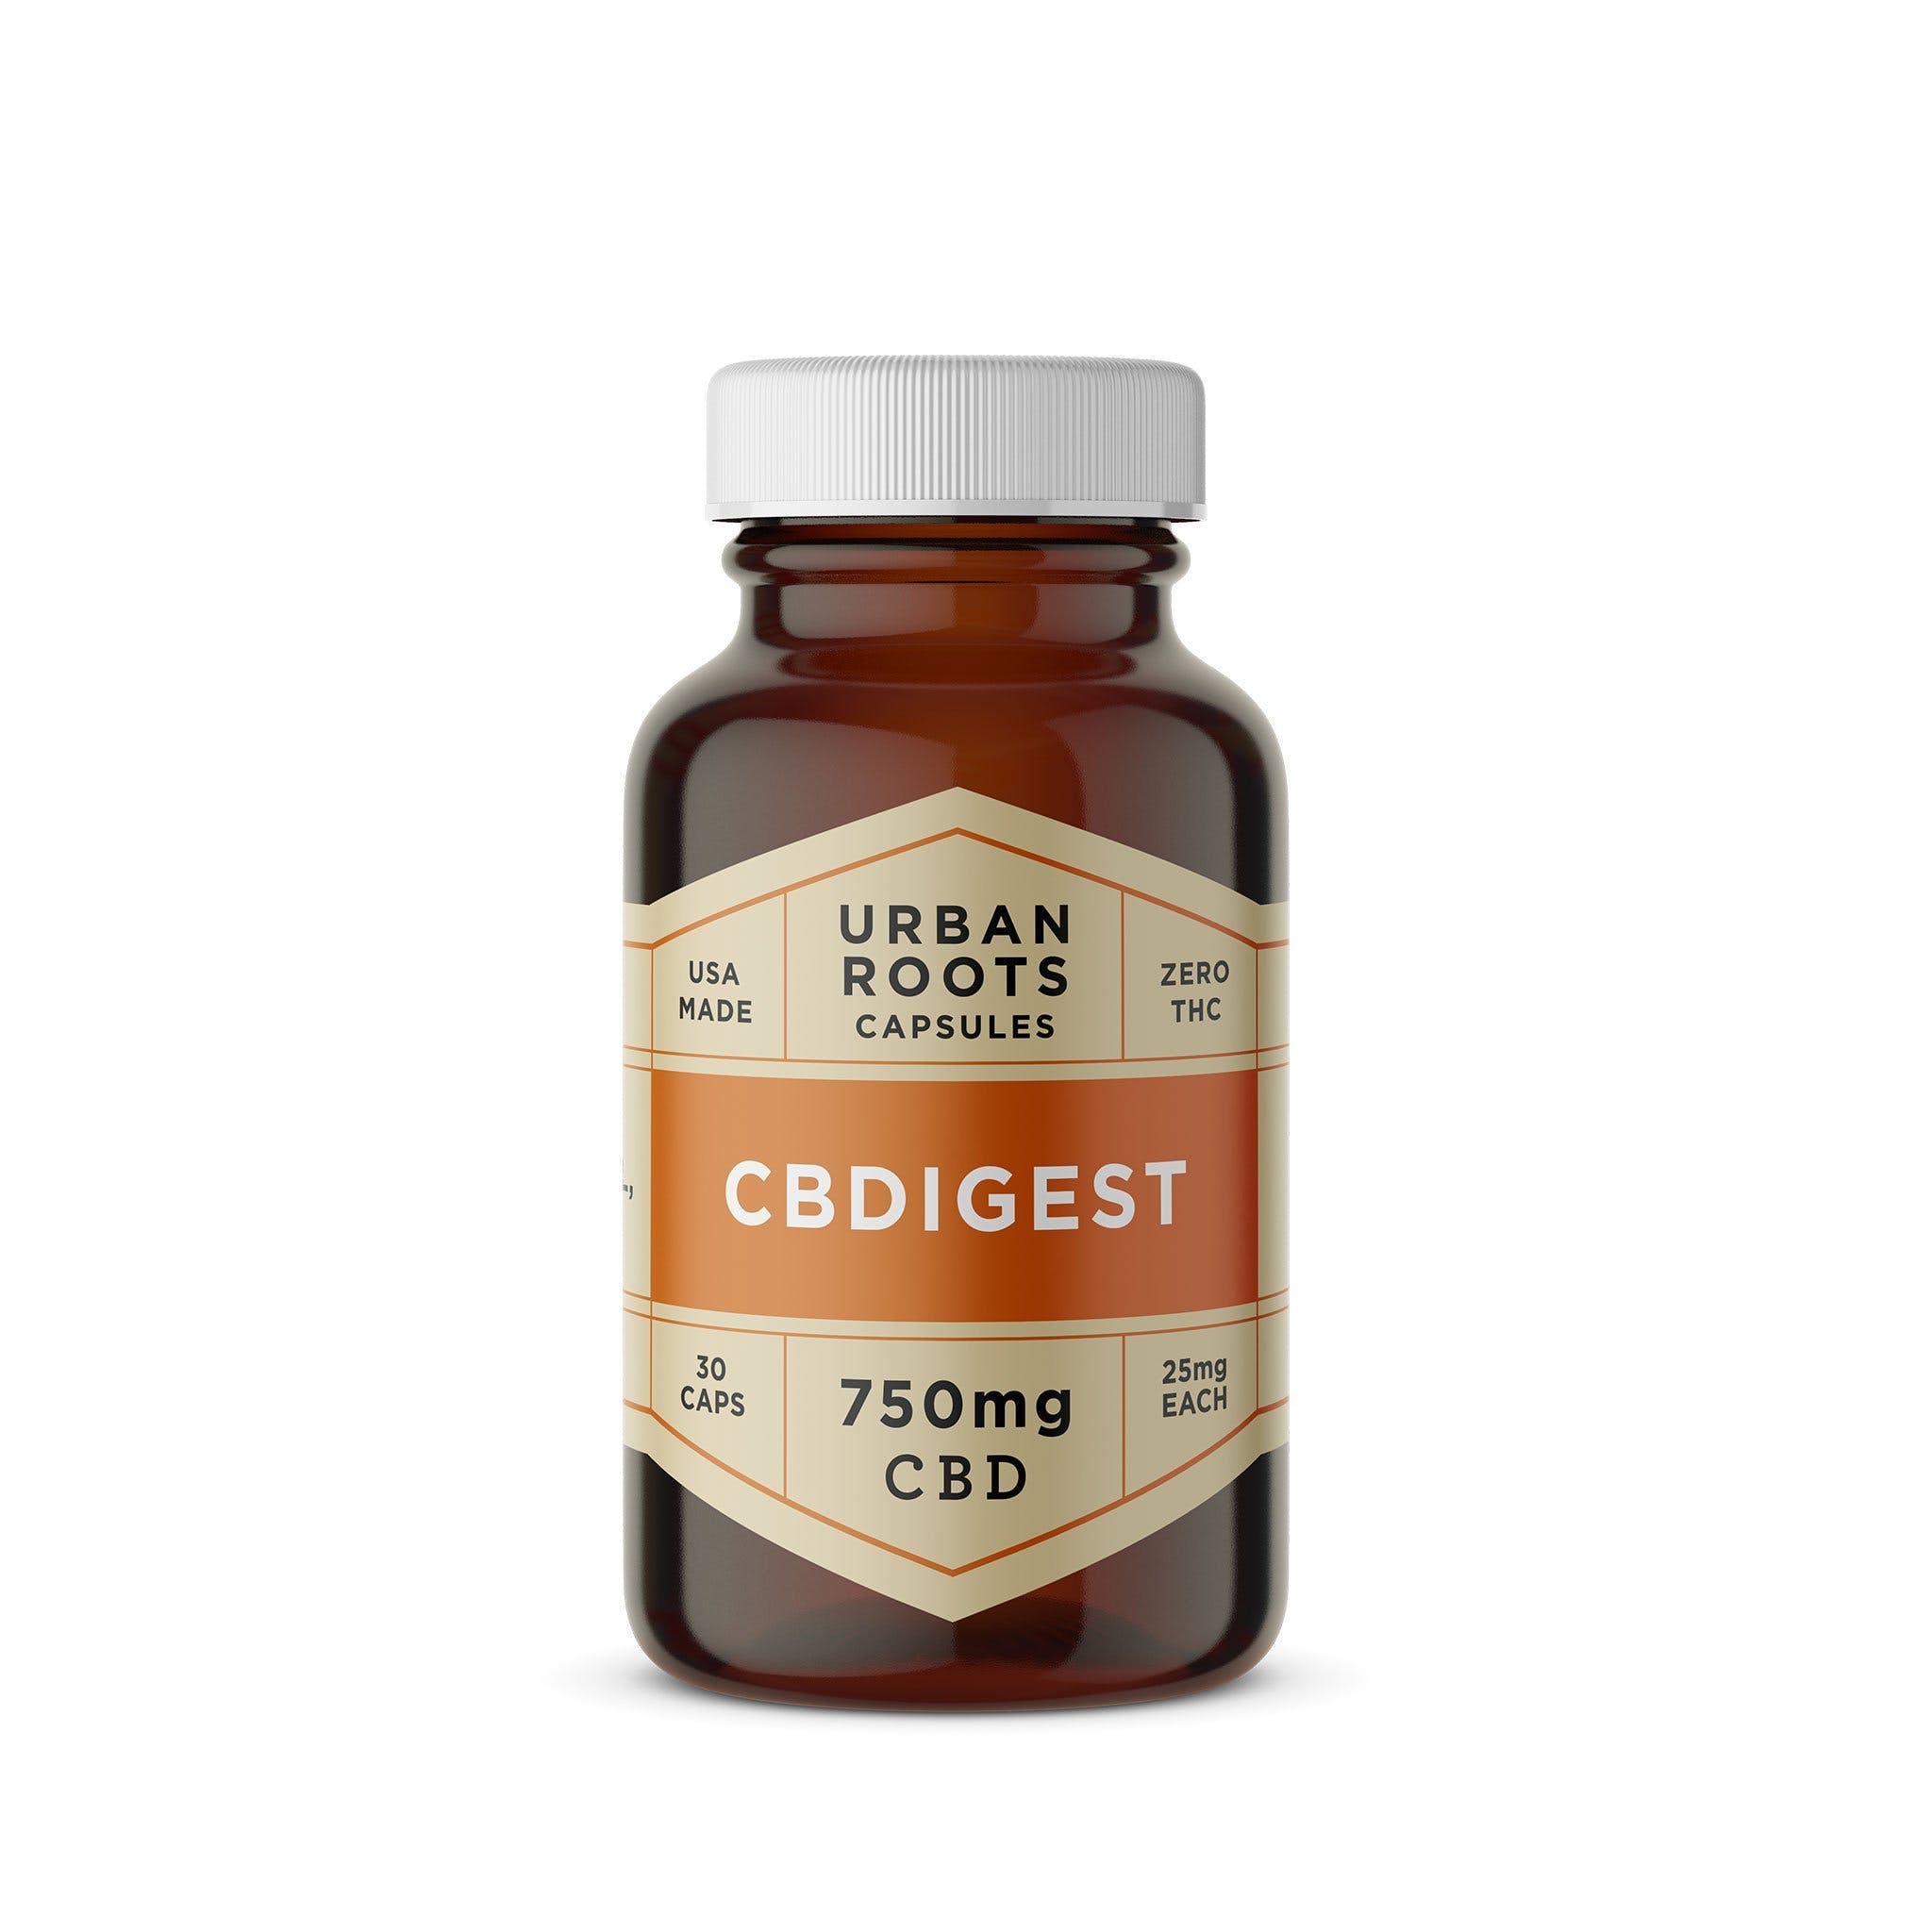 CBDigest Capsules by Urban Roots